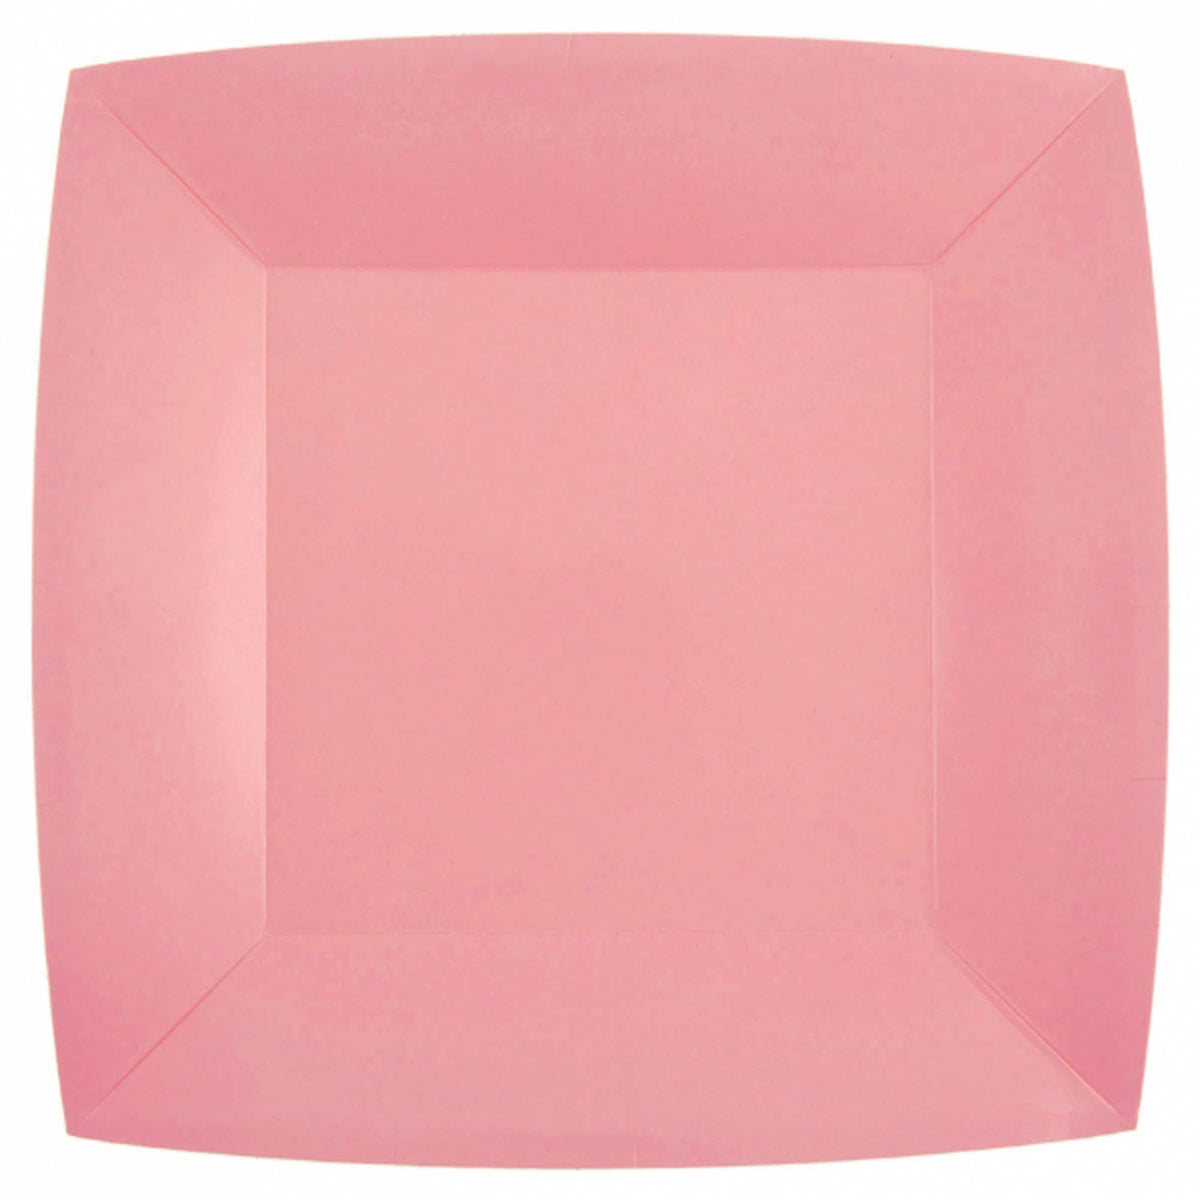 SANTEX Everyday Entertaining Pink Large Square Lunch Party Paper Plates, 9 Inches, 10 Count 3660380072126